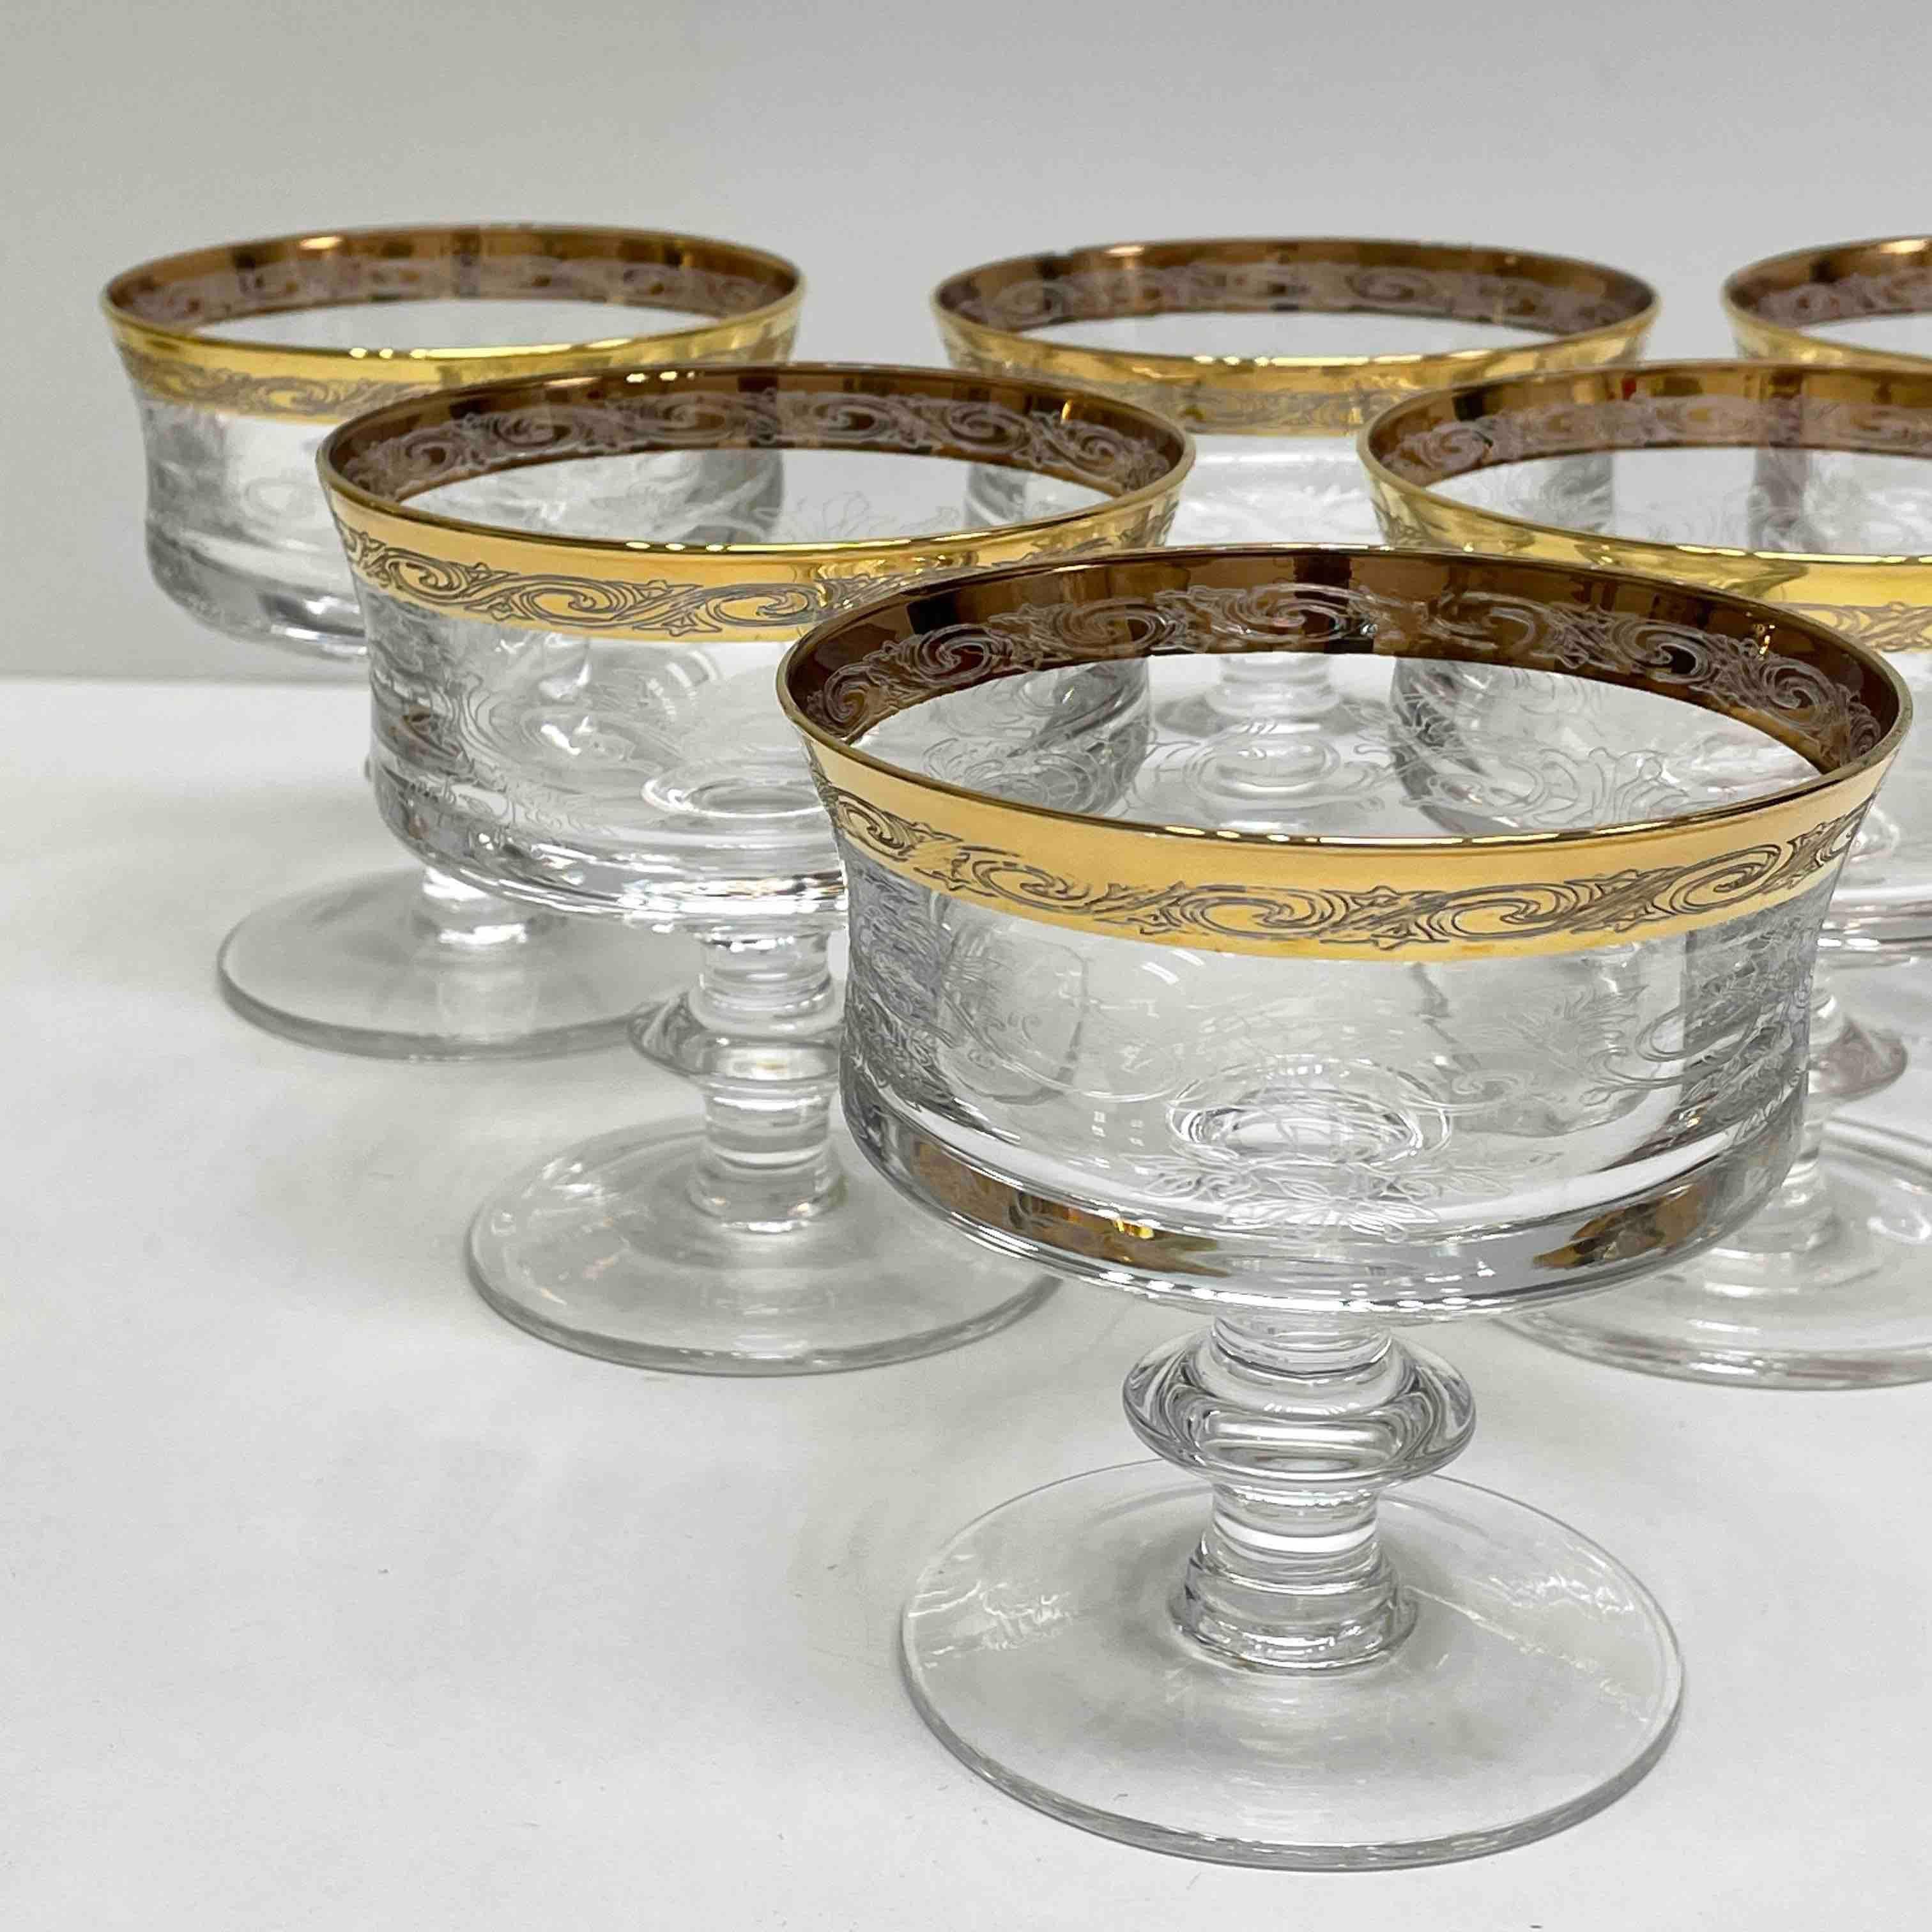 Hollywood Regency Set of Six Glass Champagne Goblets with 24k Gold Rim, Moser Glass Carlsbad